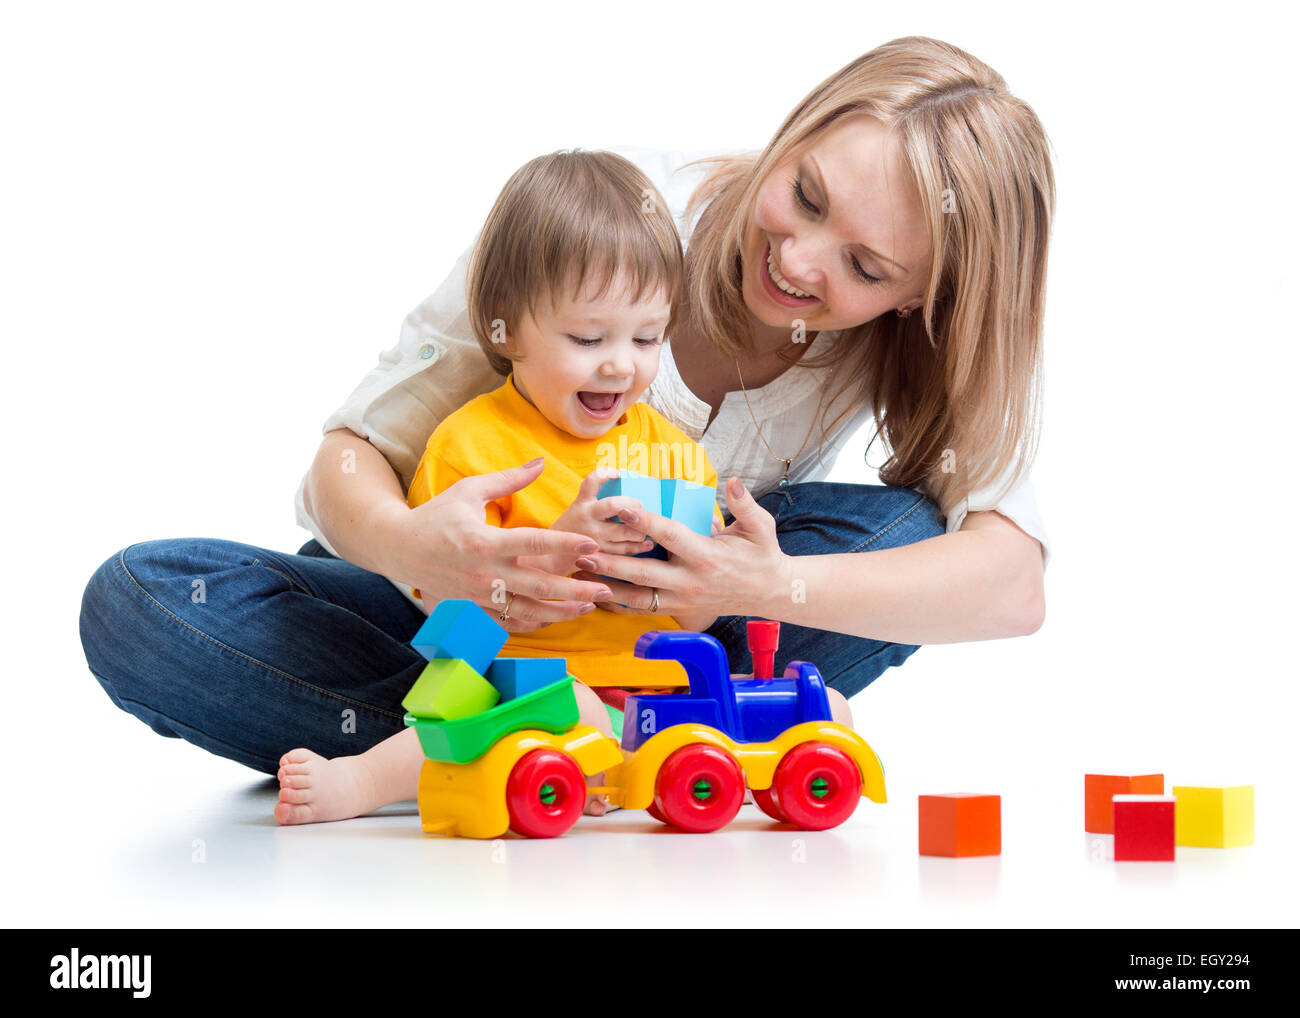 kid with his mom play building blocks toys Stock Photo